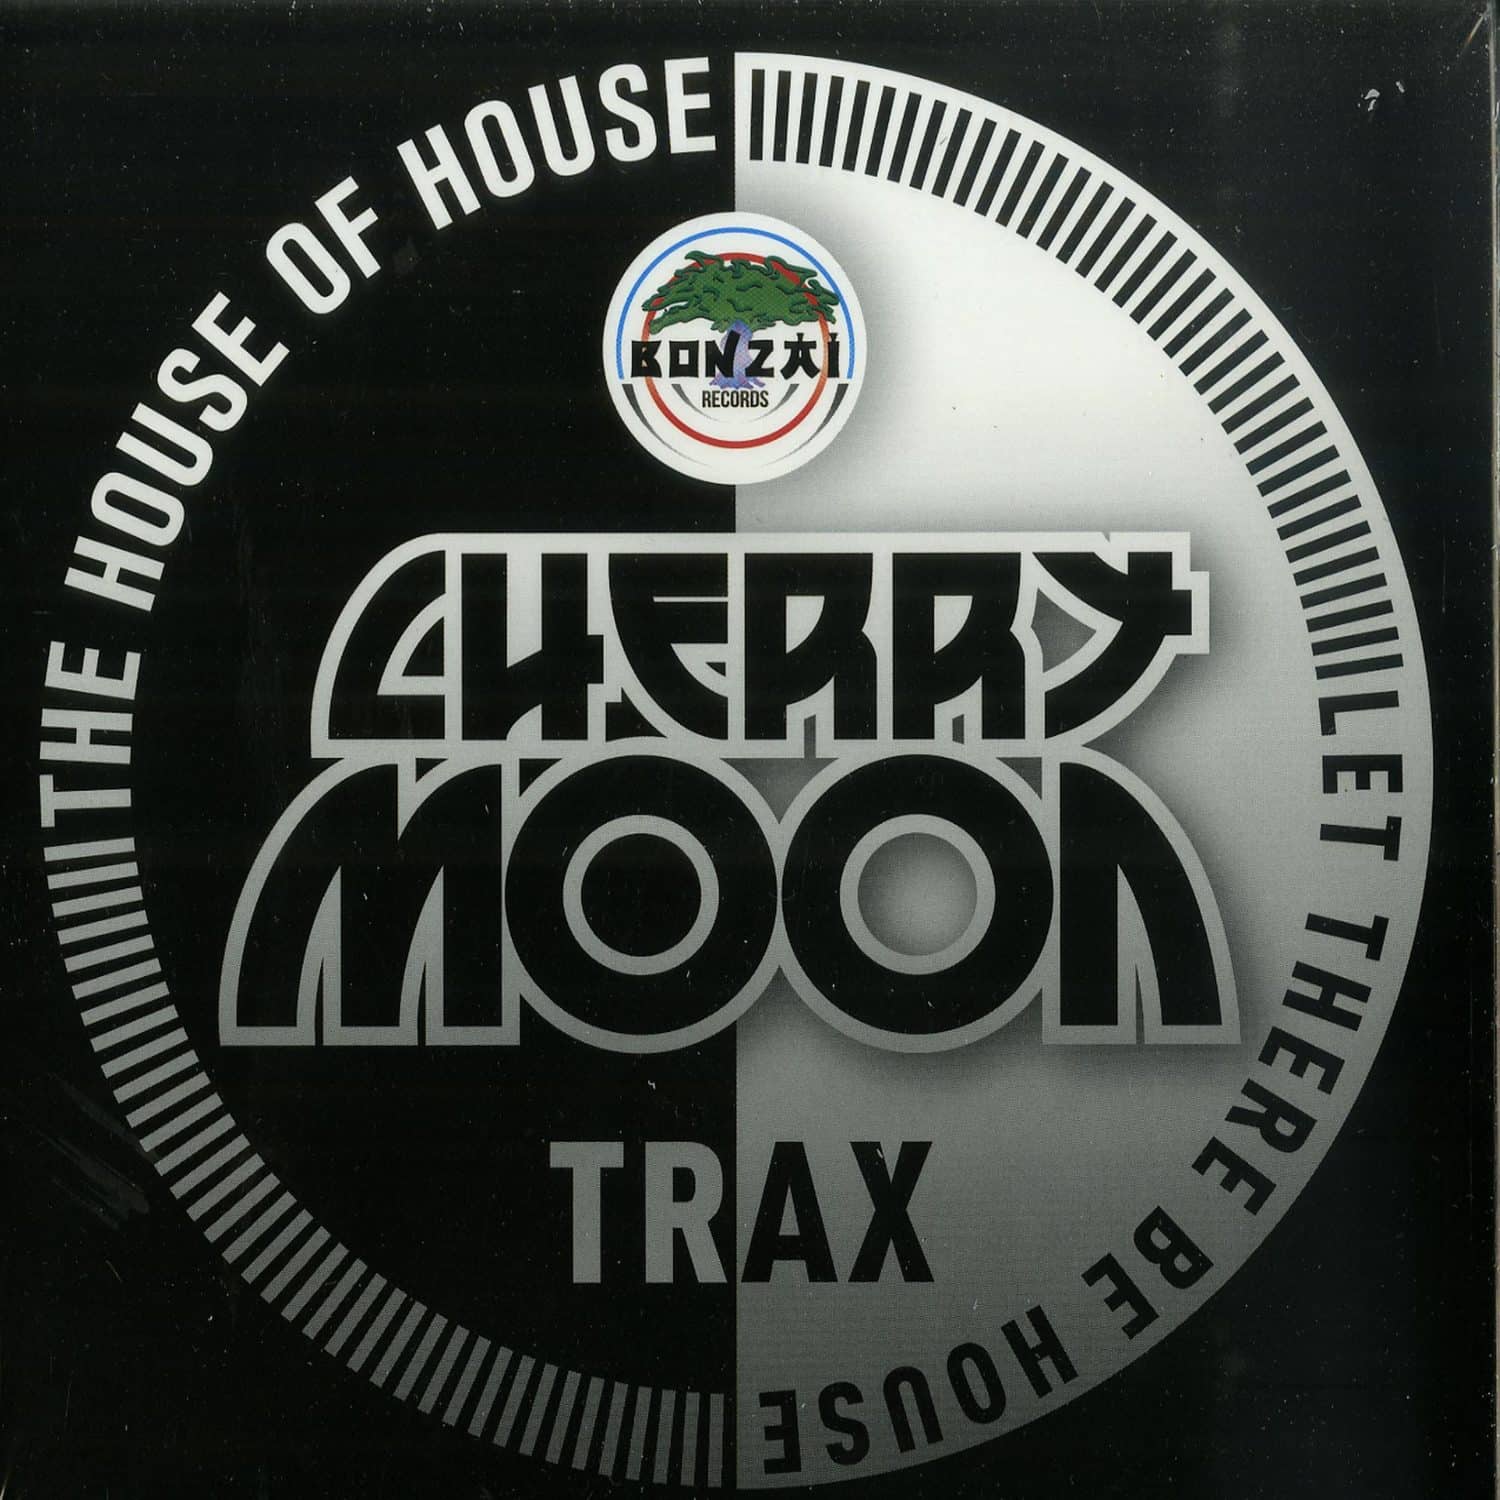 Cherry Moon Trax - THE HOUSE OF HOUSE / LET THERE BE HOUSE 